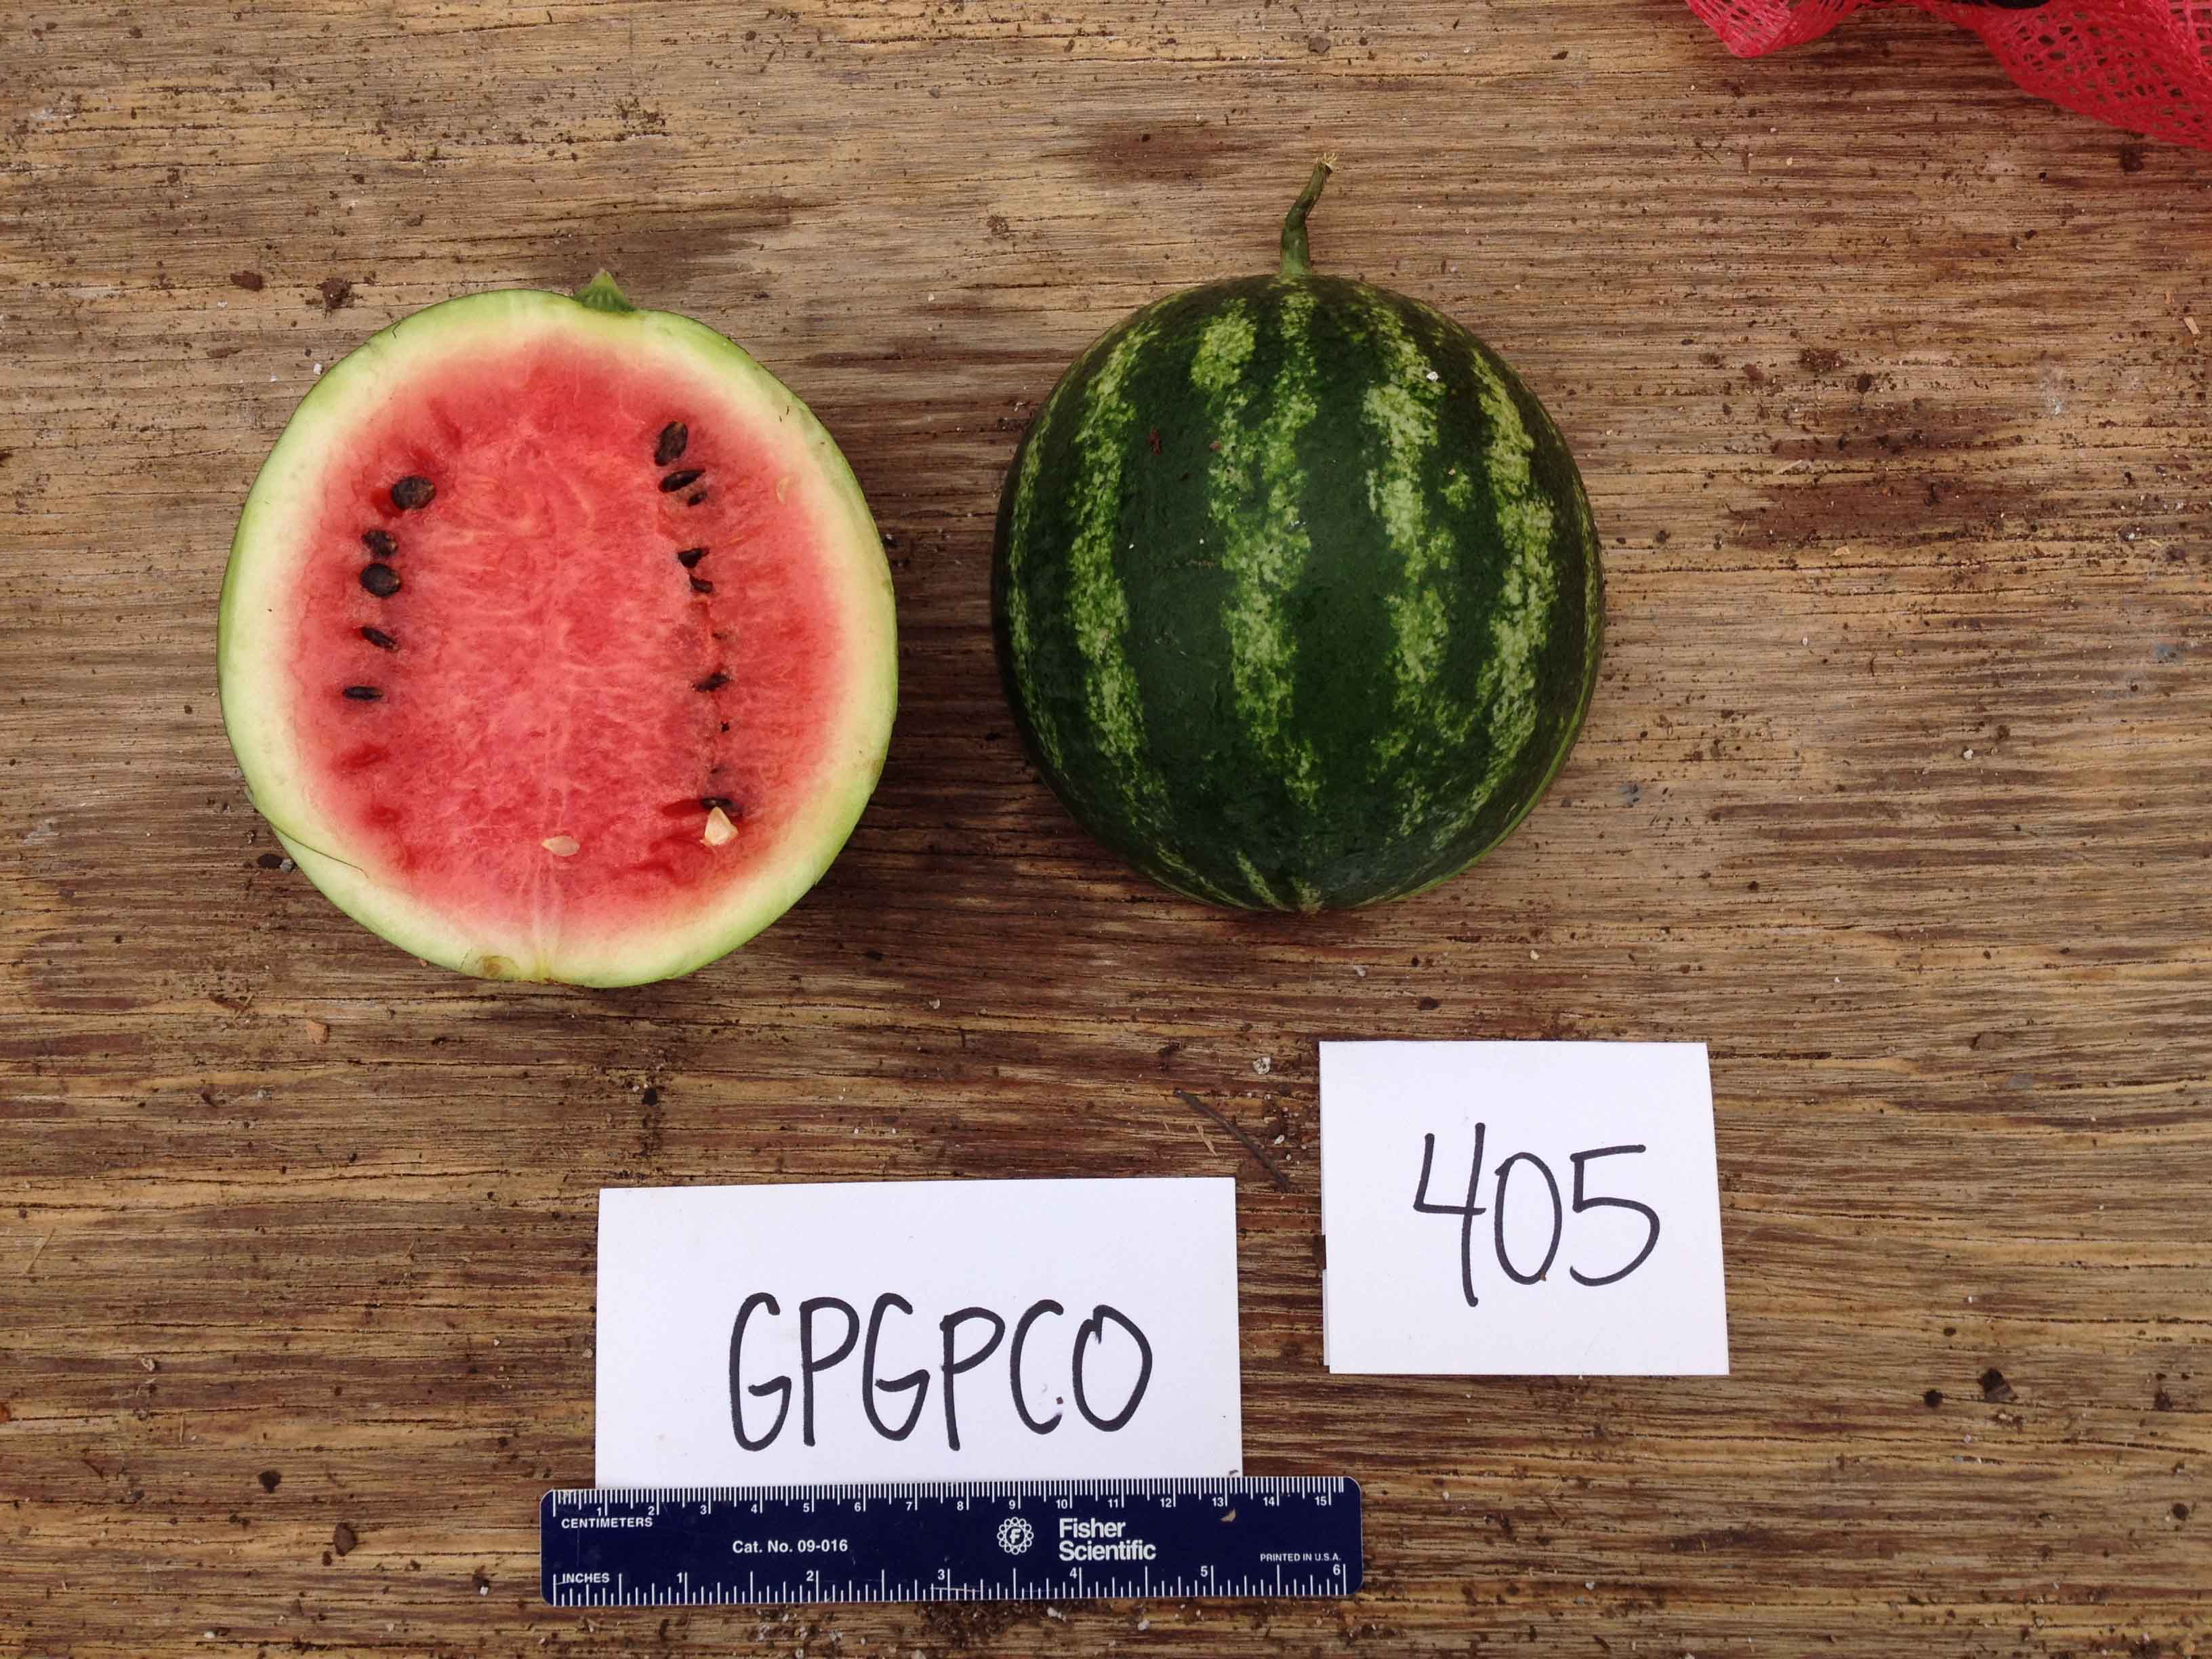 Another contender in UGA graduate student Suzanne Stone's quest to breed a variety of watermelon that works well for organic growers. She is working on producing personal-sized watermelons that have a striking flavor and eye-catching appearance.